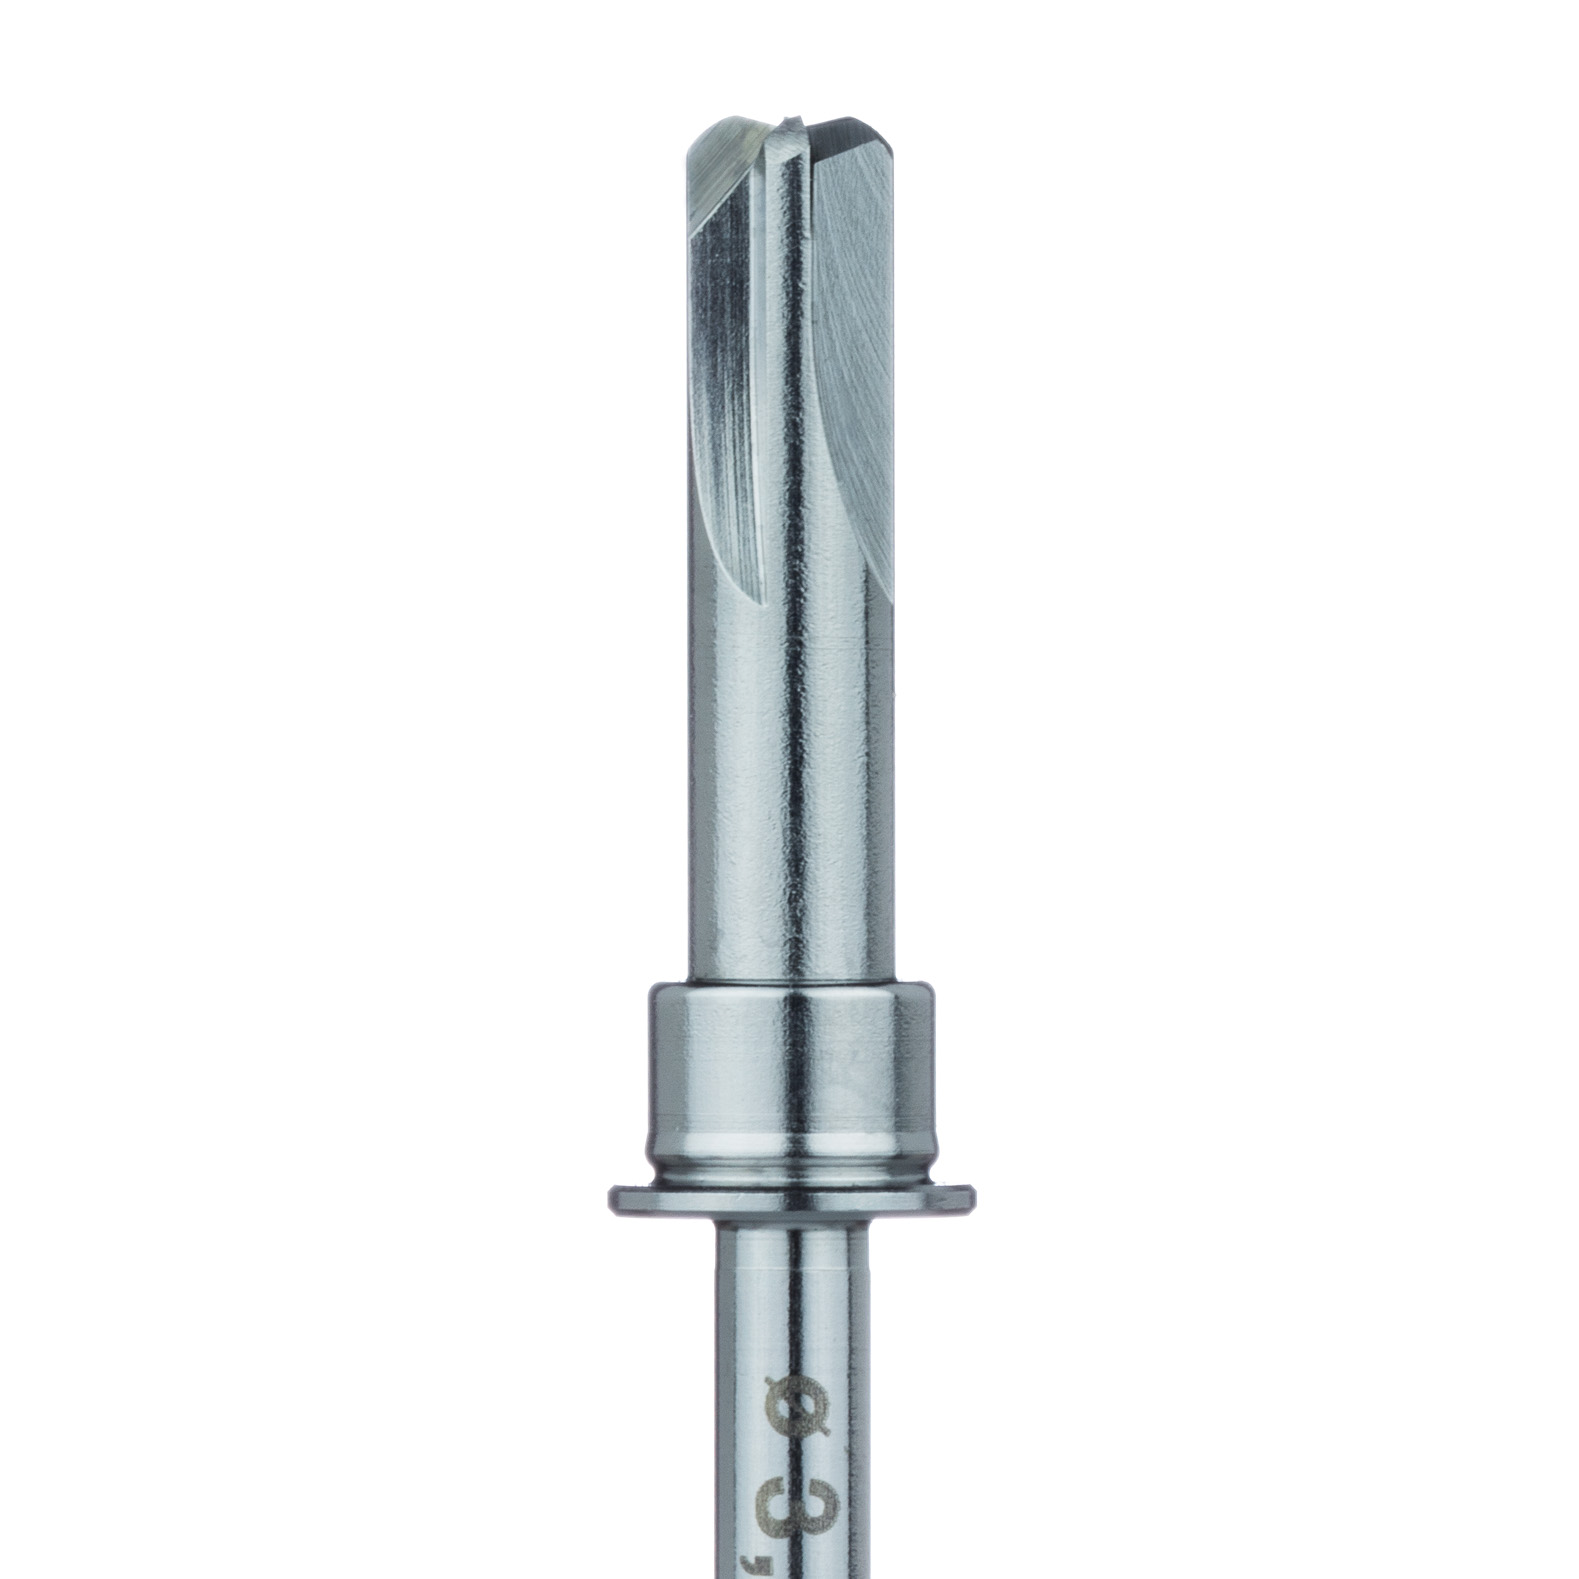 CL003 Surgery, Crestal Drill with stop, 3.1mm RAXL